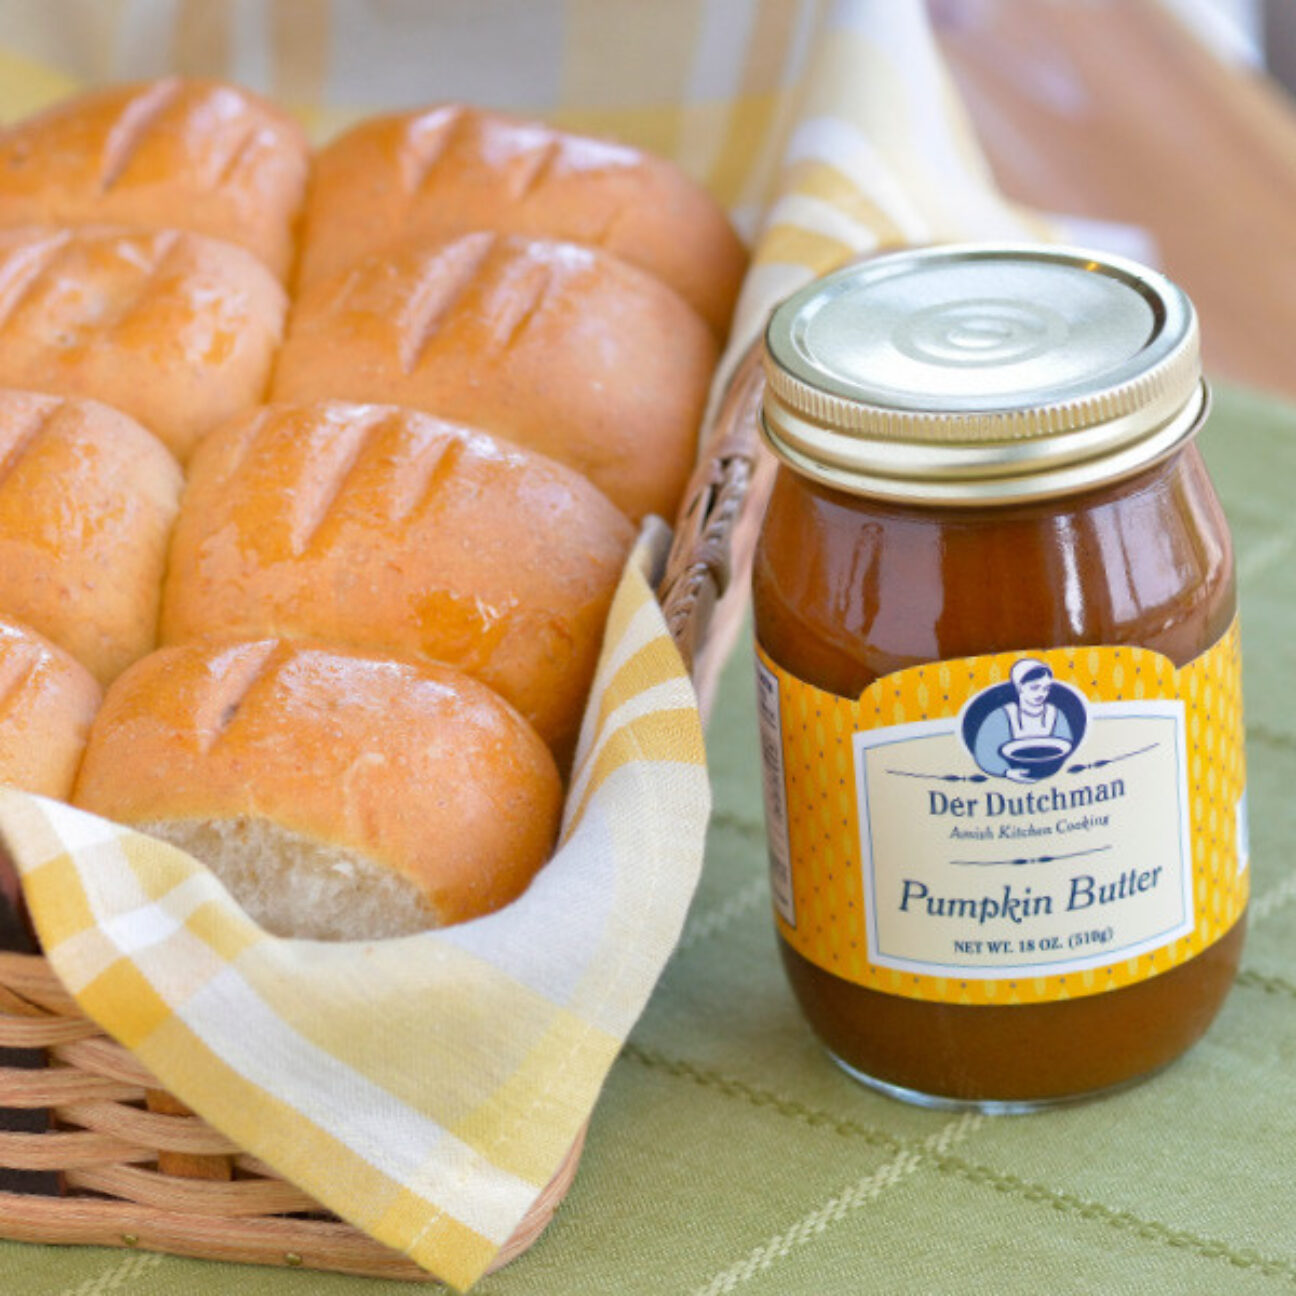 It's not just for fall! Our Der Dutchman Pumpkin Butter has just the right amount of spice and pairs nicely with our freshly-baked dinner rolls.

You'll receive one 18oz Der Dutchman Pumpkin Butter and a dozen Dinner Rolls, with choice of wheat or white.